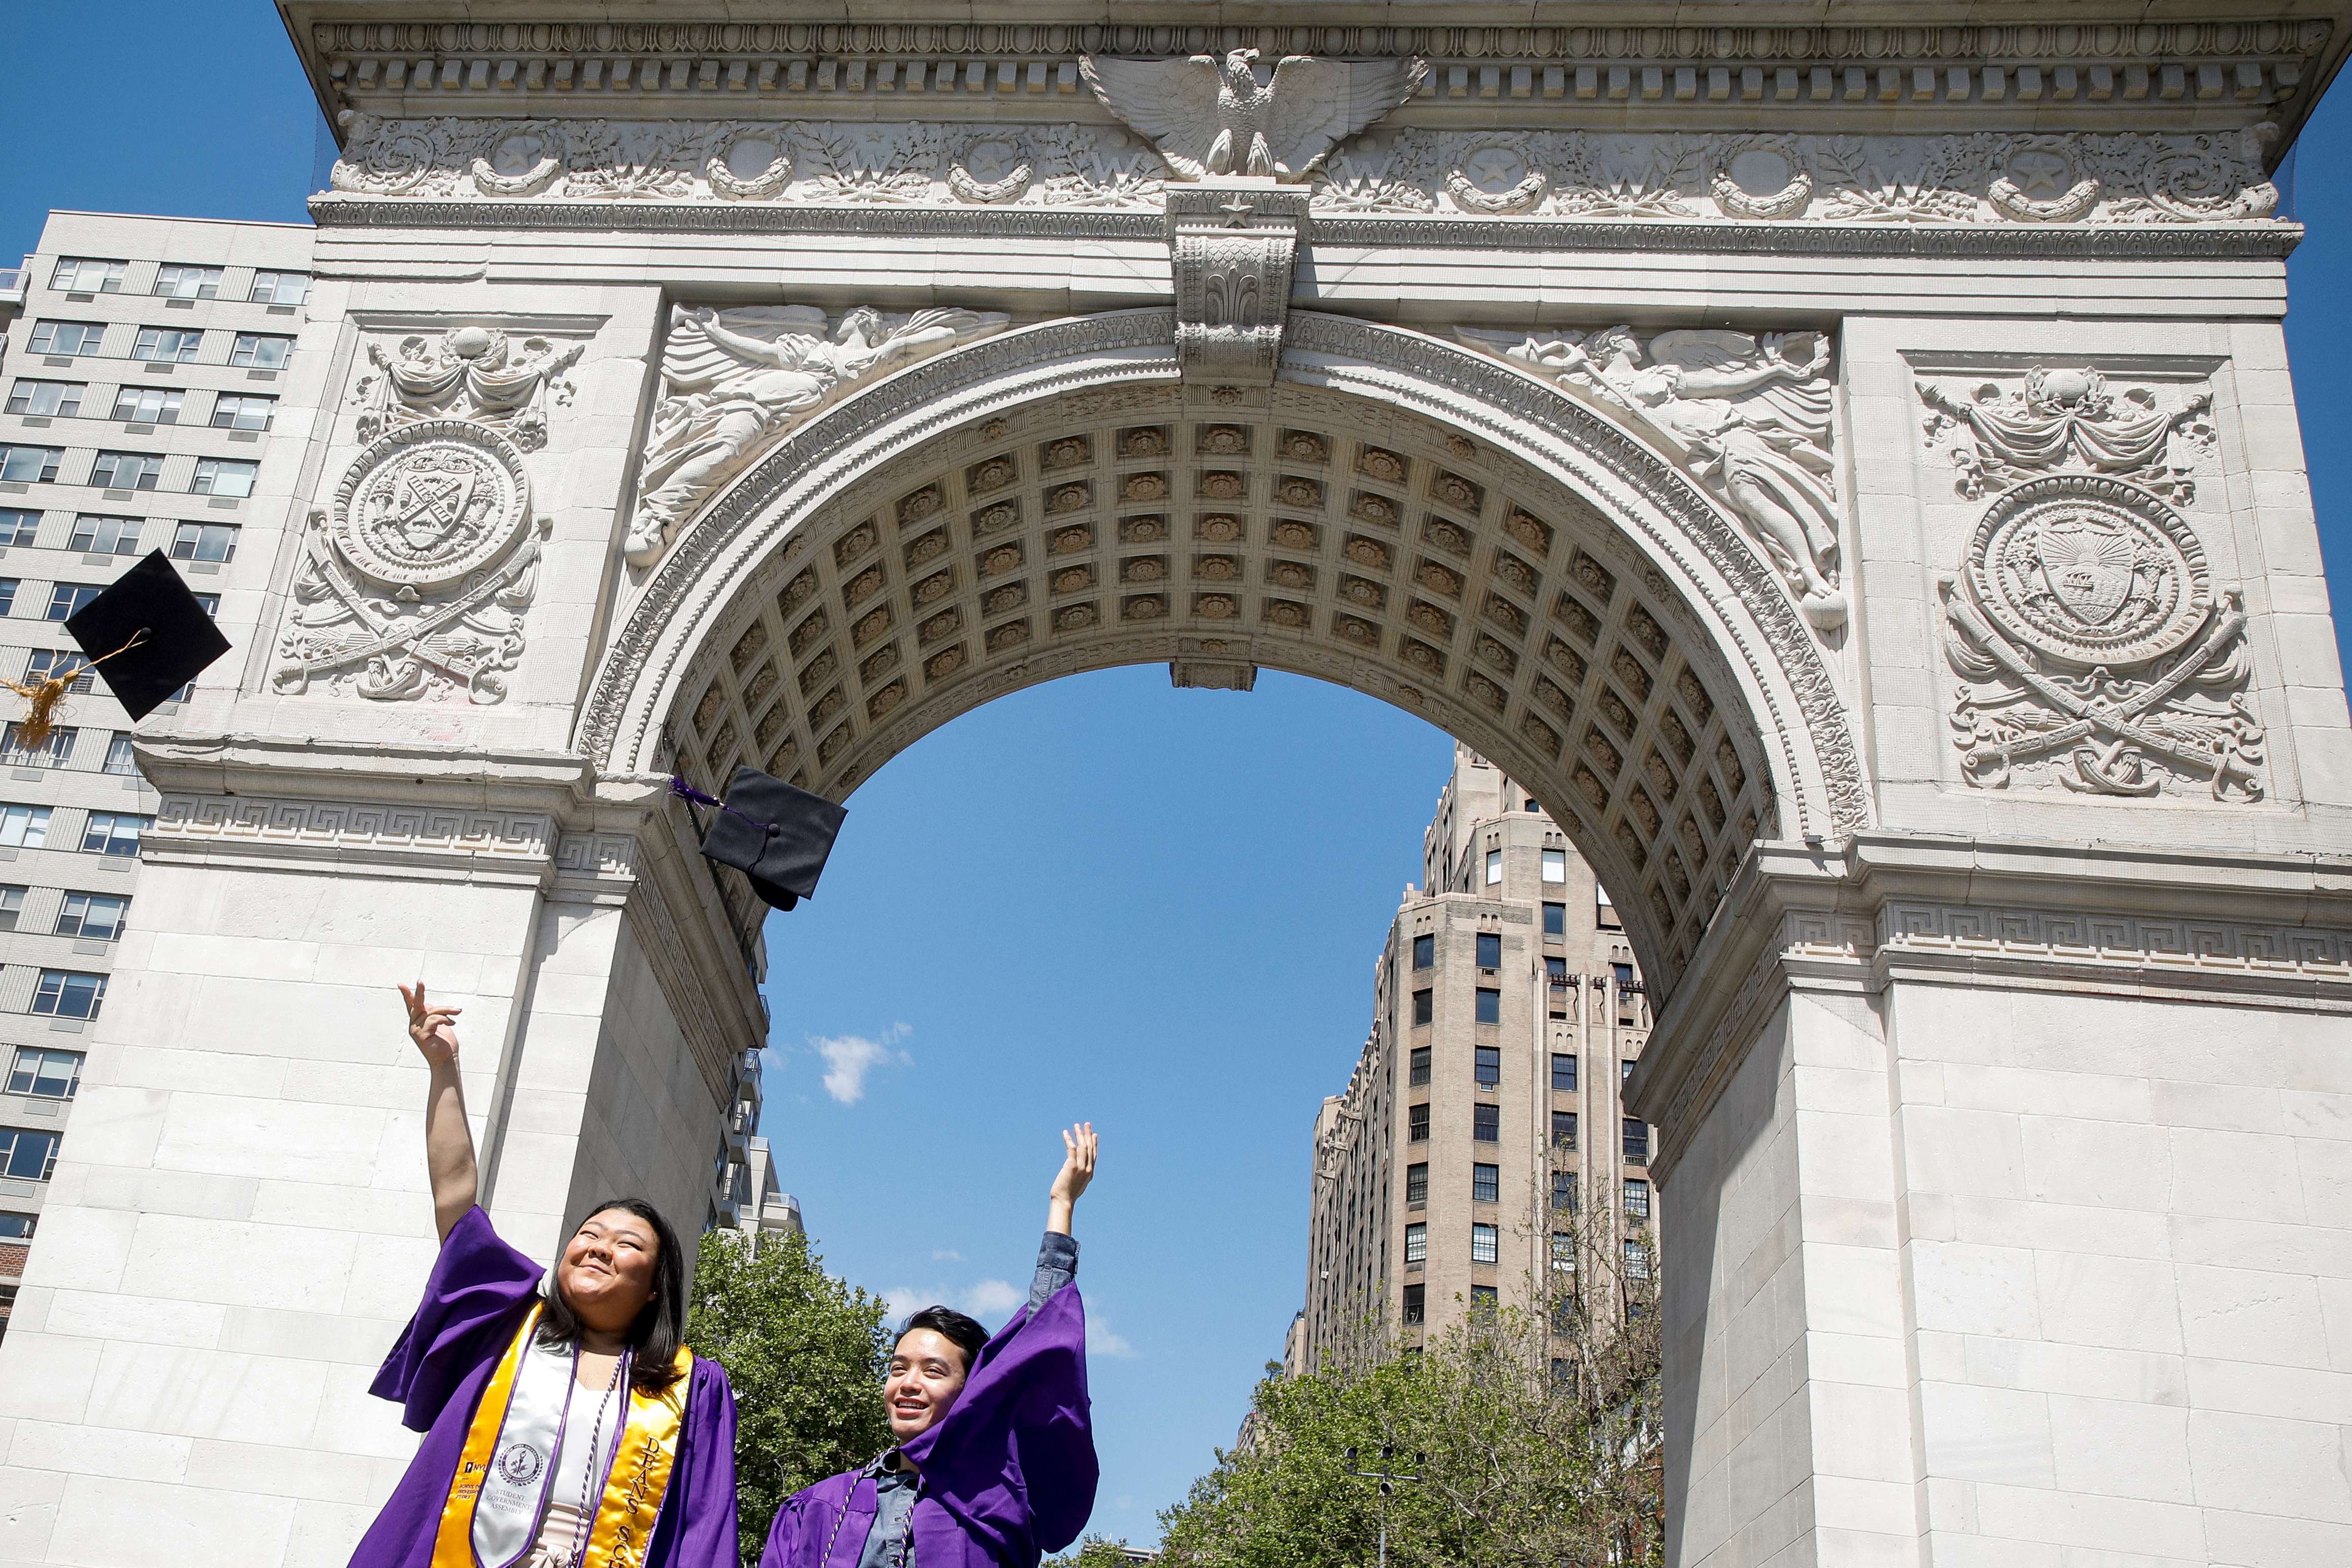 New York University graduates pose together under the Washington Square Arch in Washington Square Park in New York City, U.S., May 13, 2021. REUTERS/Brendan McDermid